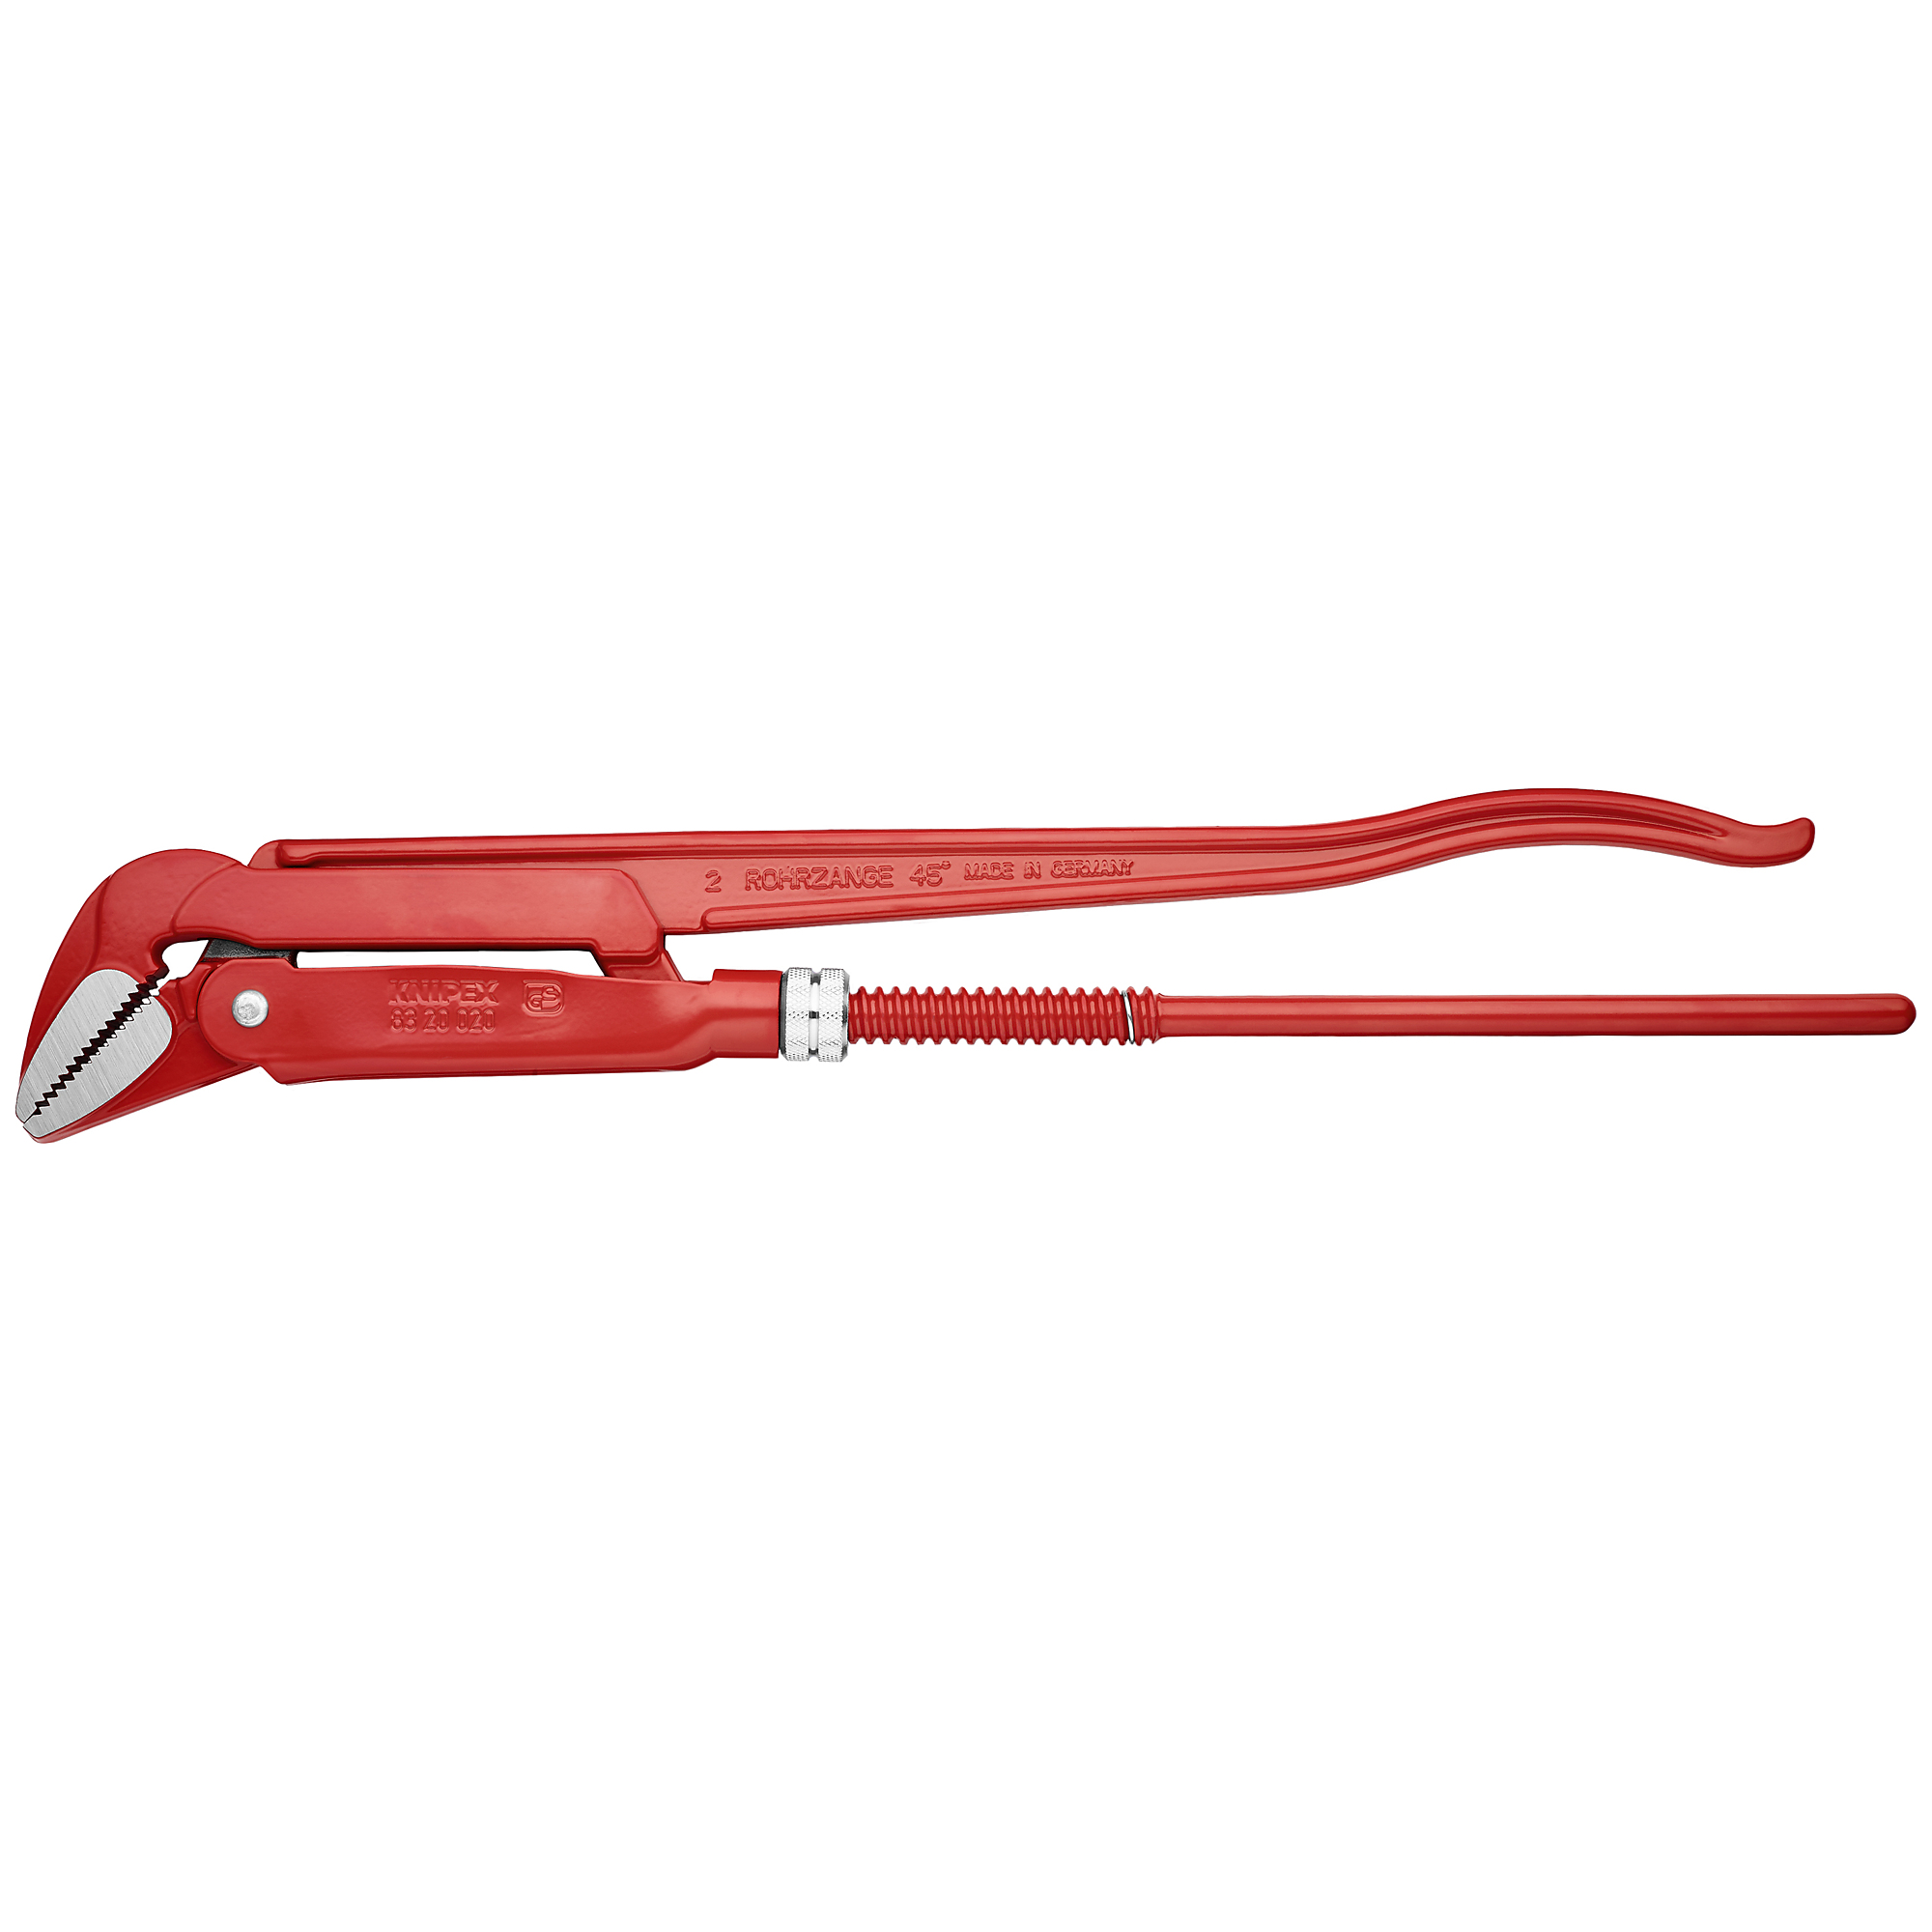 KNIPEX, Swedish Pipe Wrench-45Â°, 22.25Inch, Pieces (qty.) 1 Material Steel, Jaw Capacity 2.75 in, Model 83 20 020